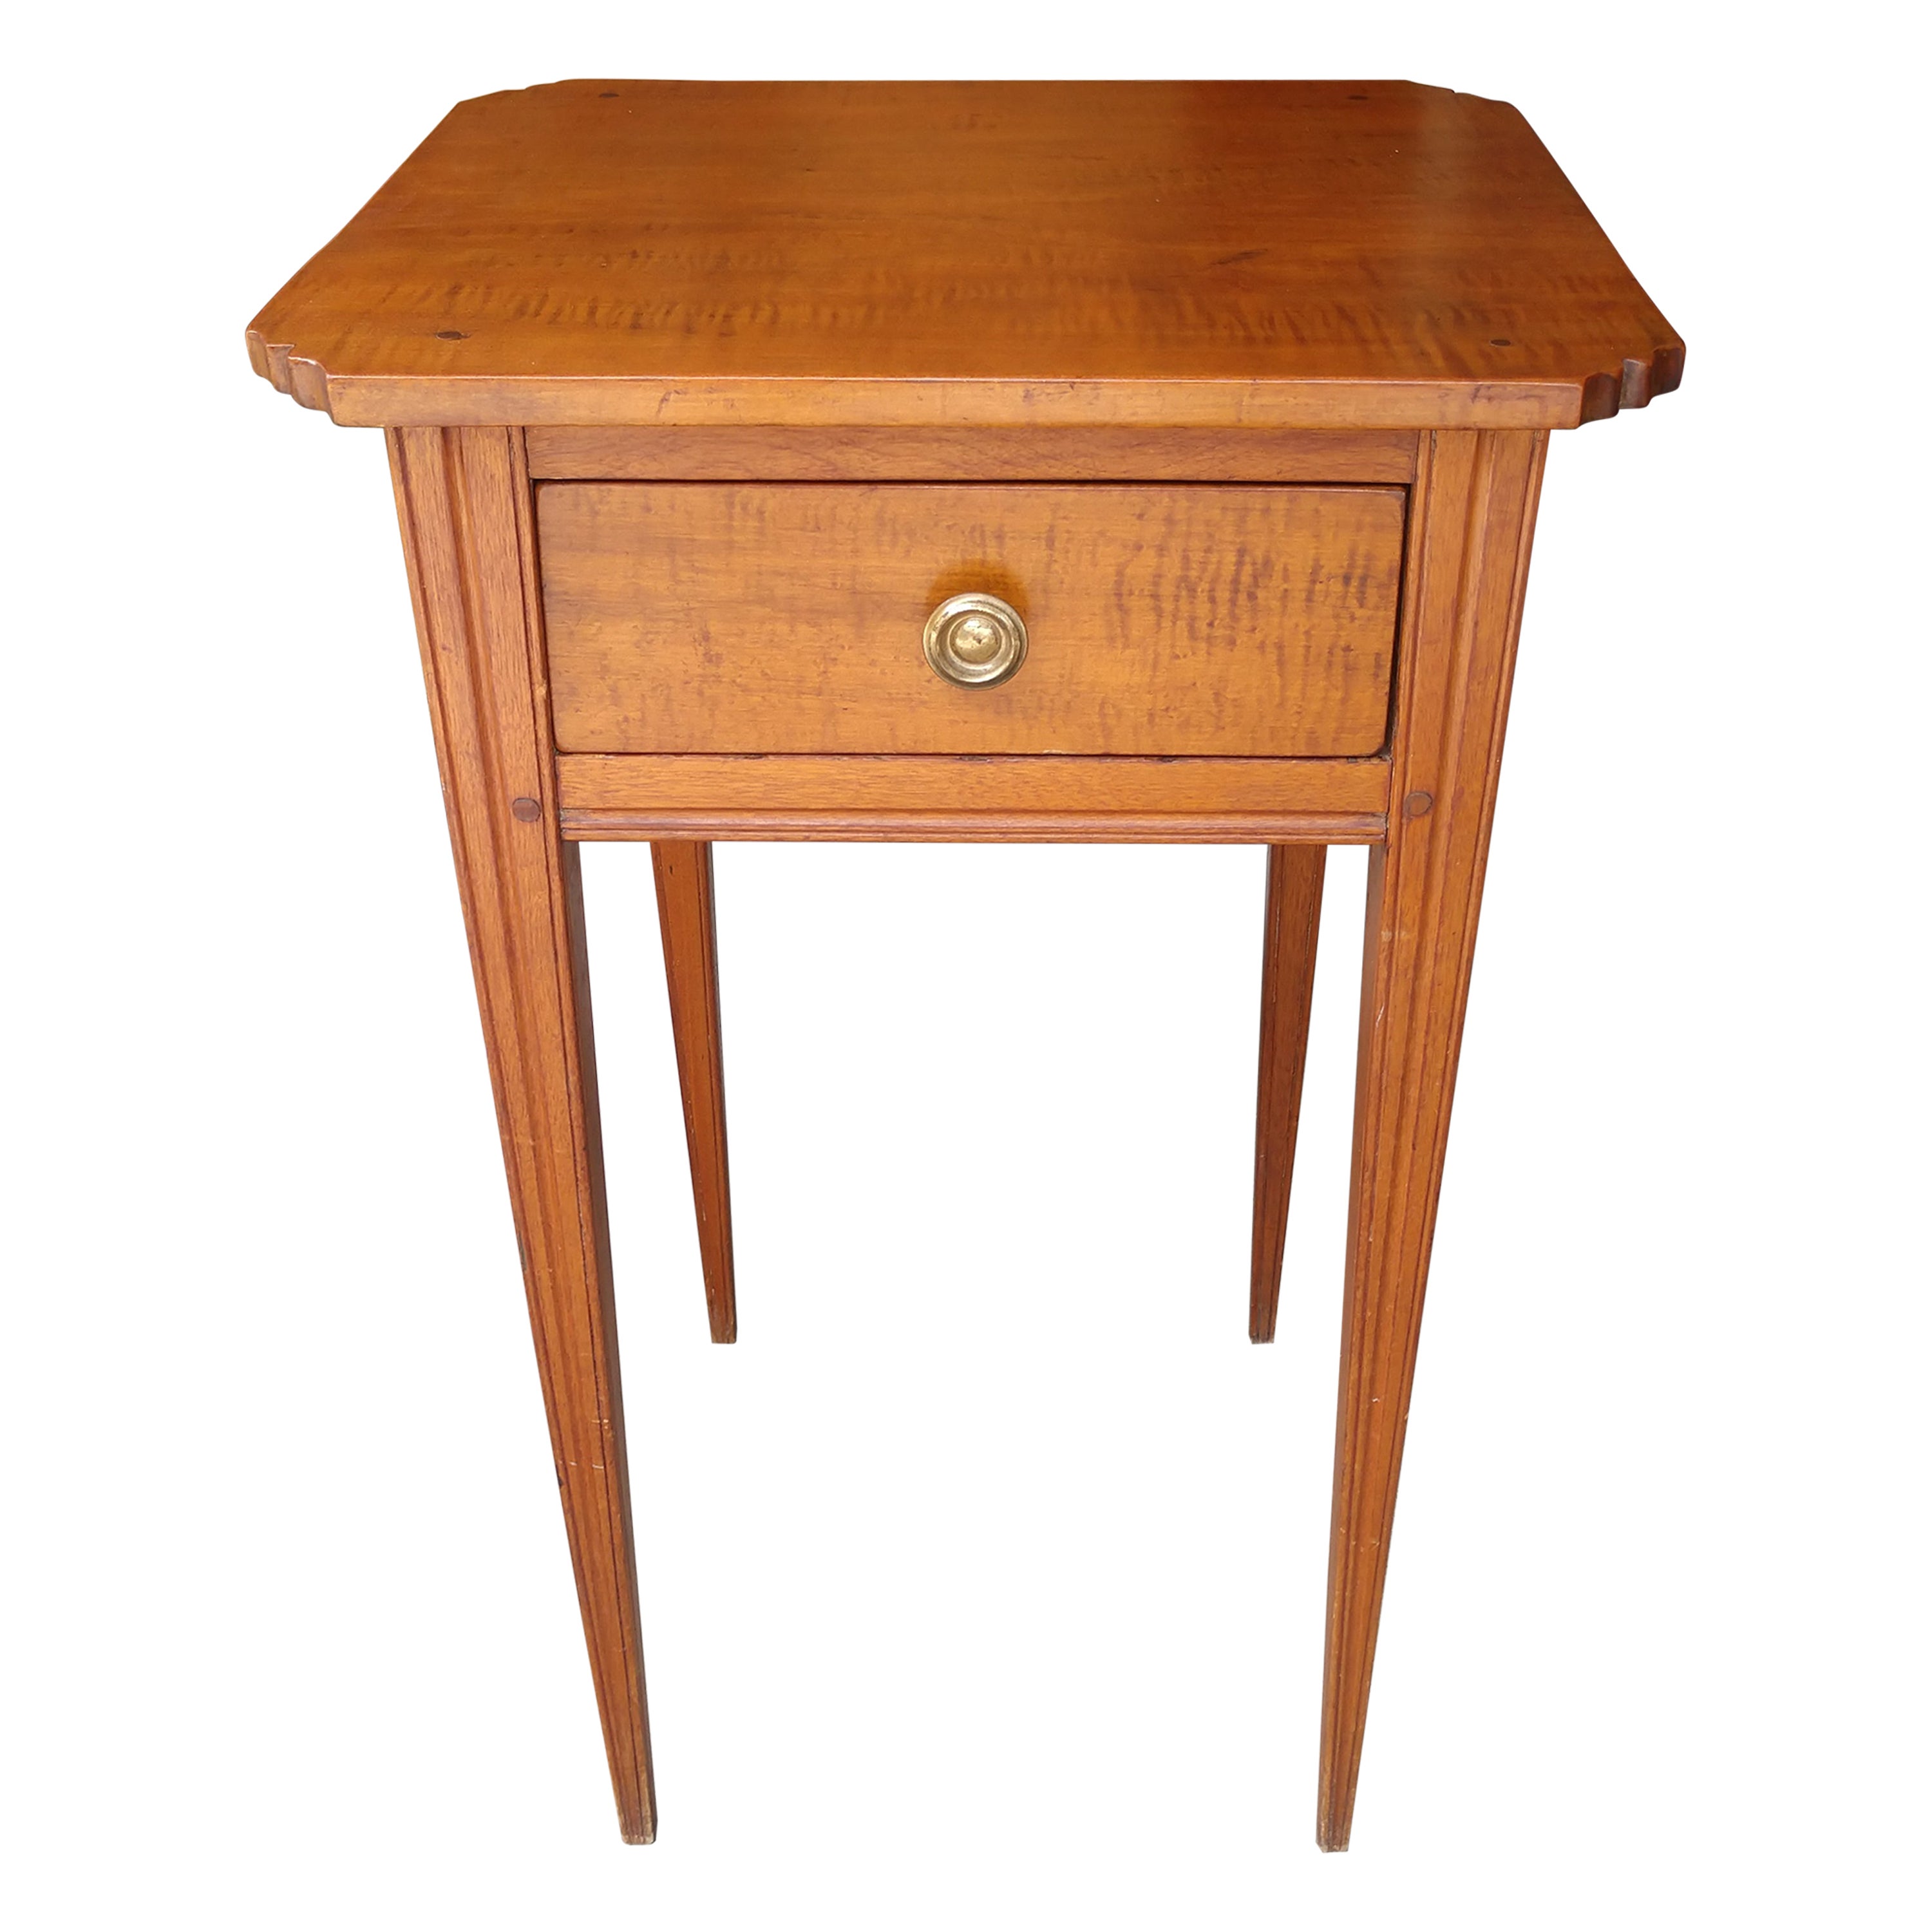 Early Tiger Maple One Drawer Stand with Invected Corners, c1810